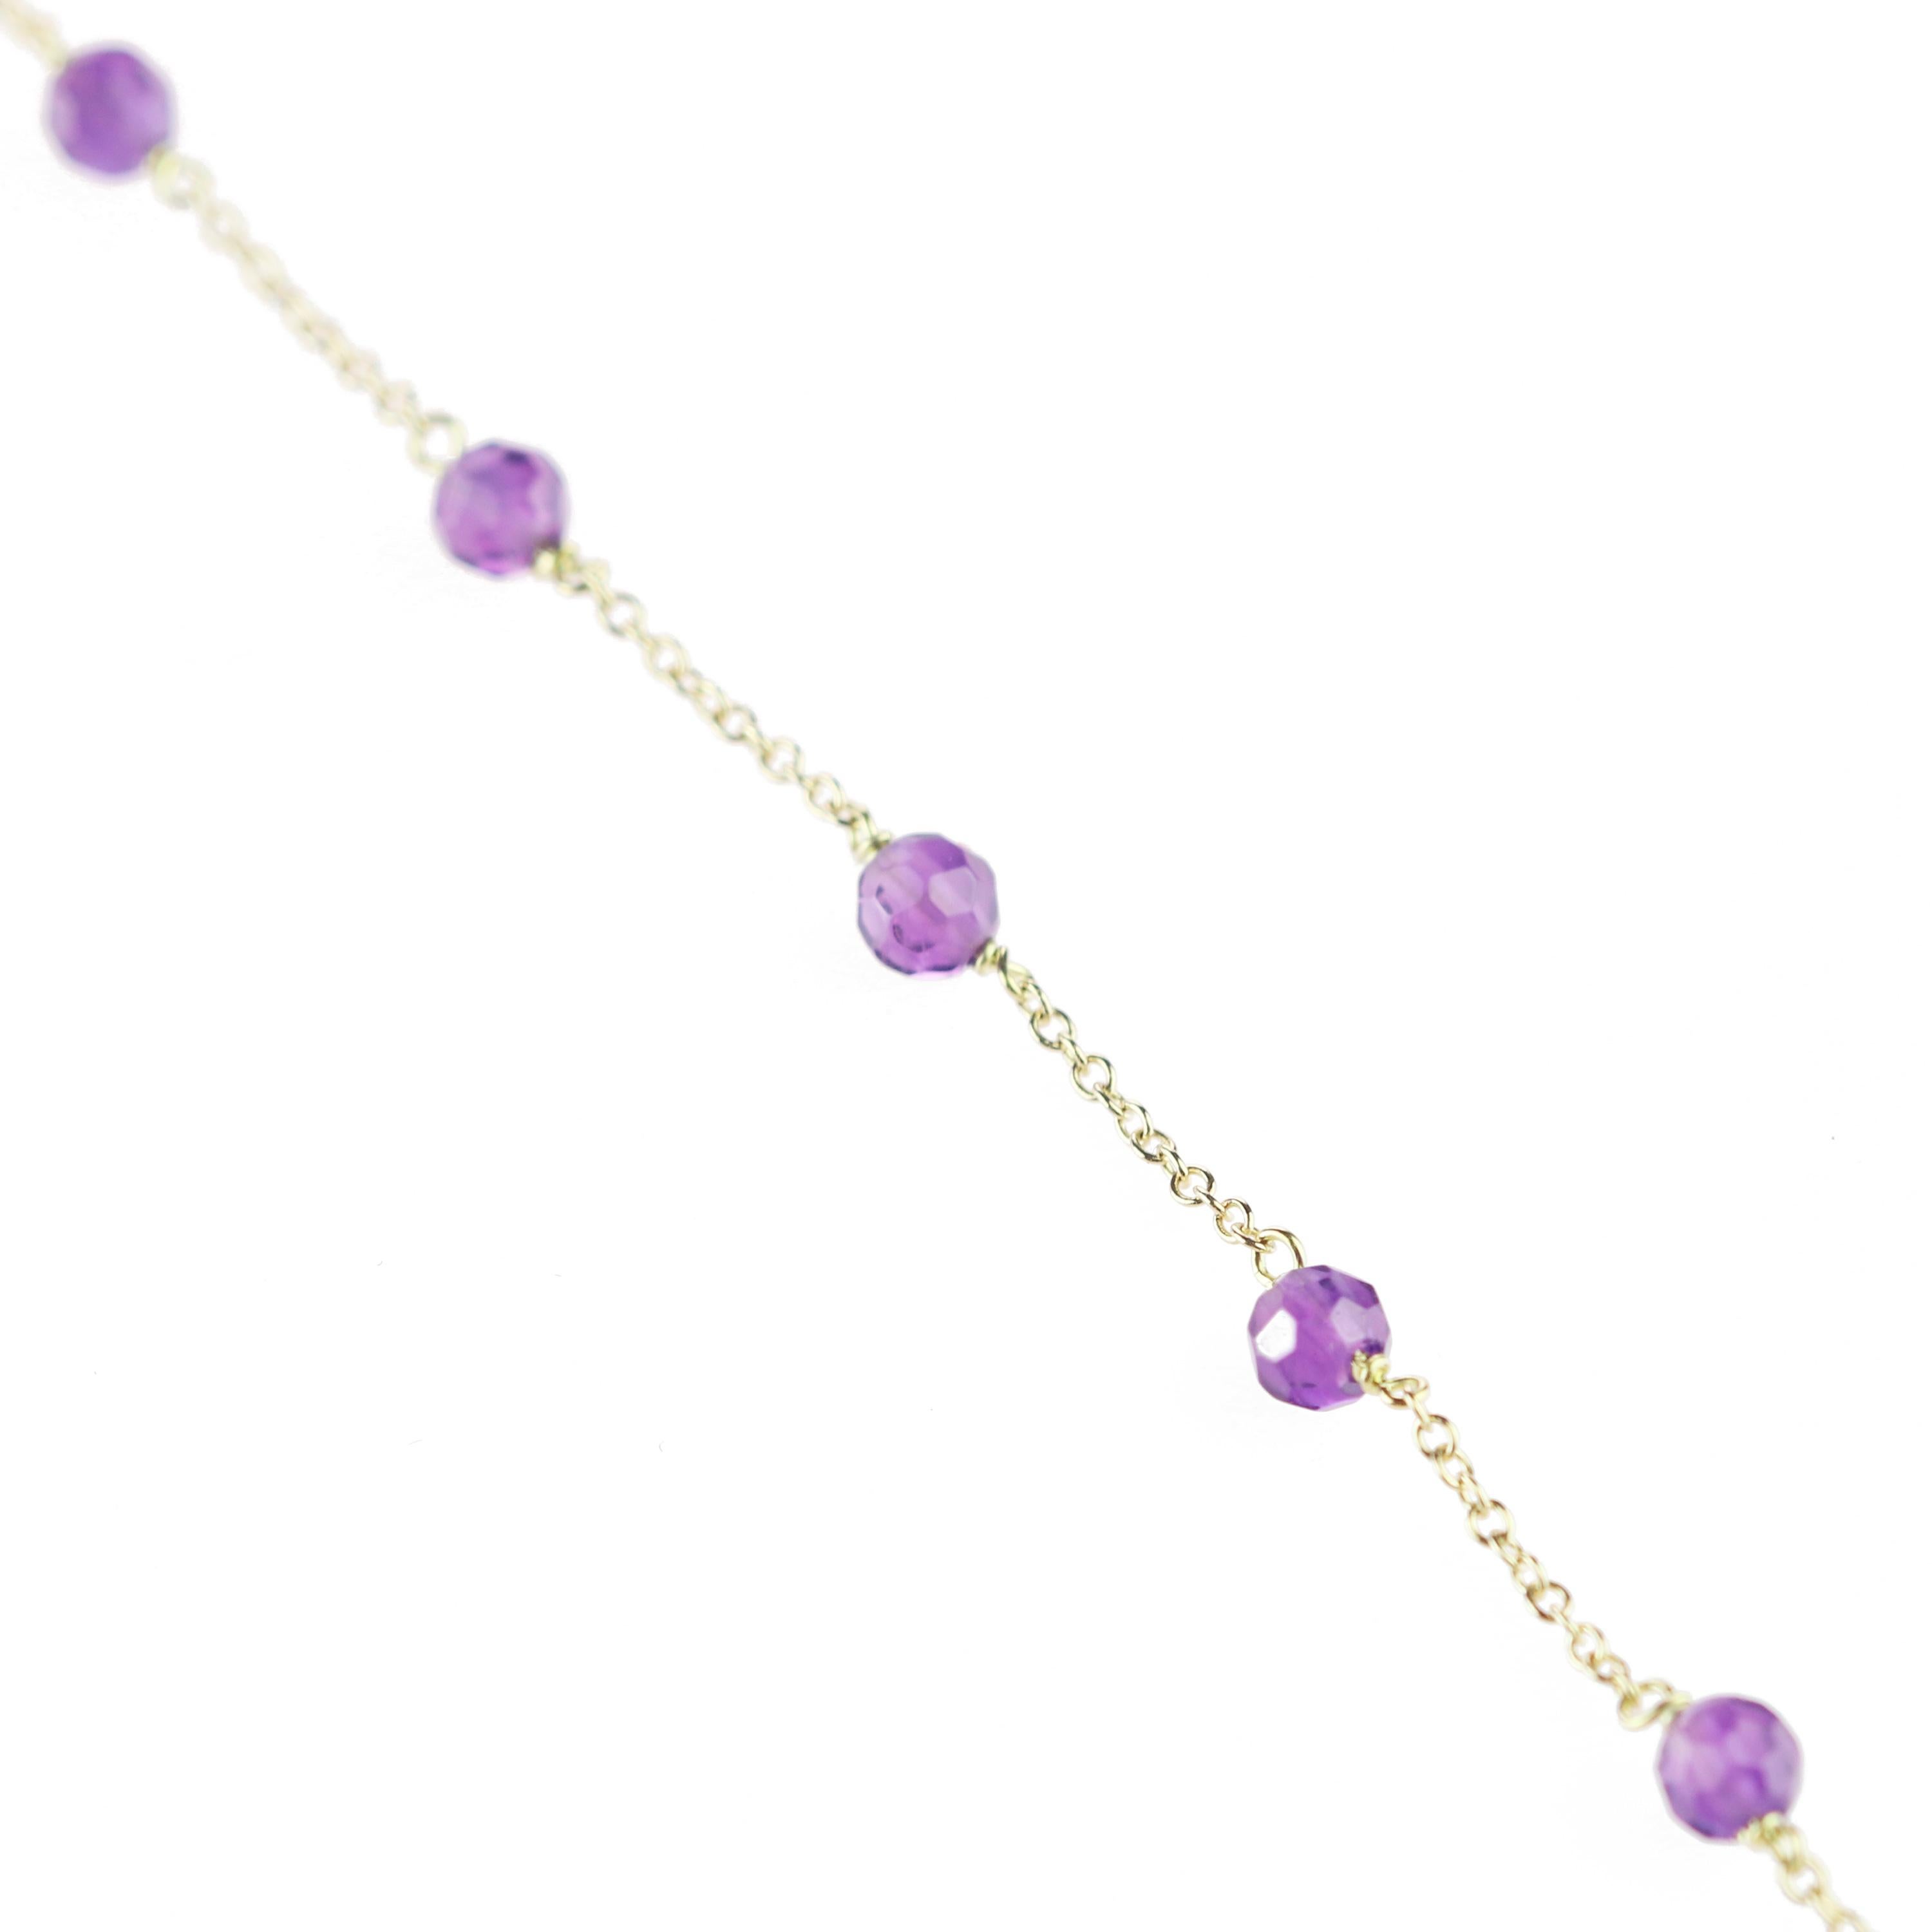 Modern Intini Jewels Gold Plate Chain Amethyst Rondelles Handmade Cocktail Bracelet For Sale